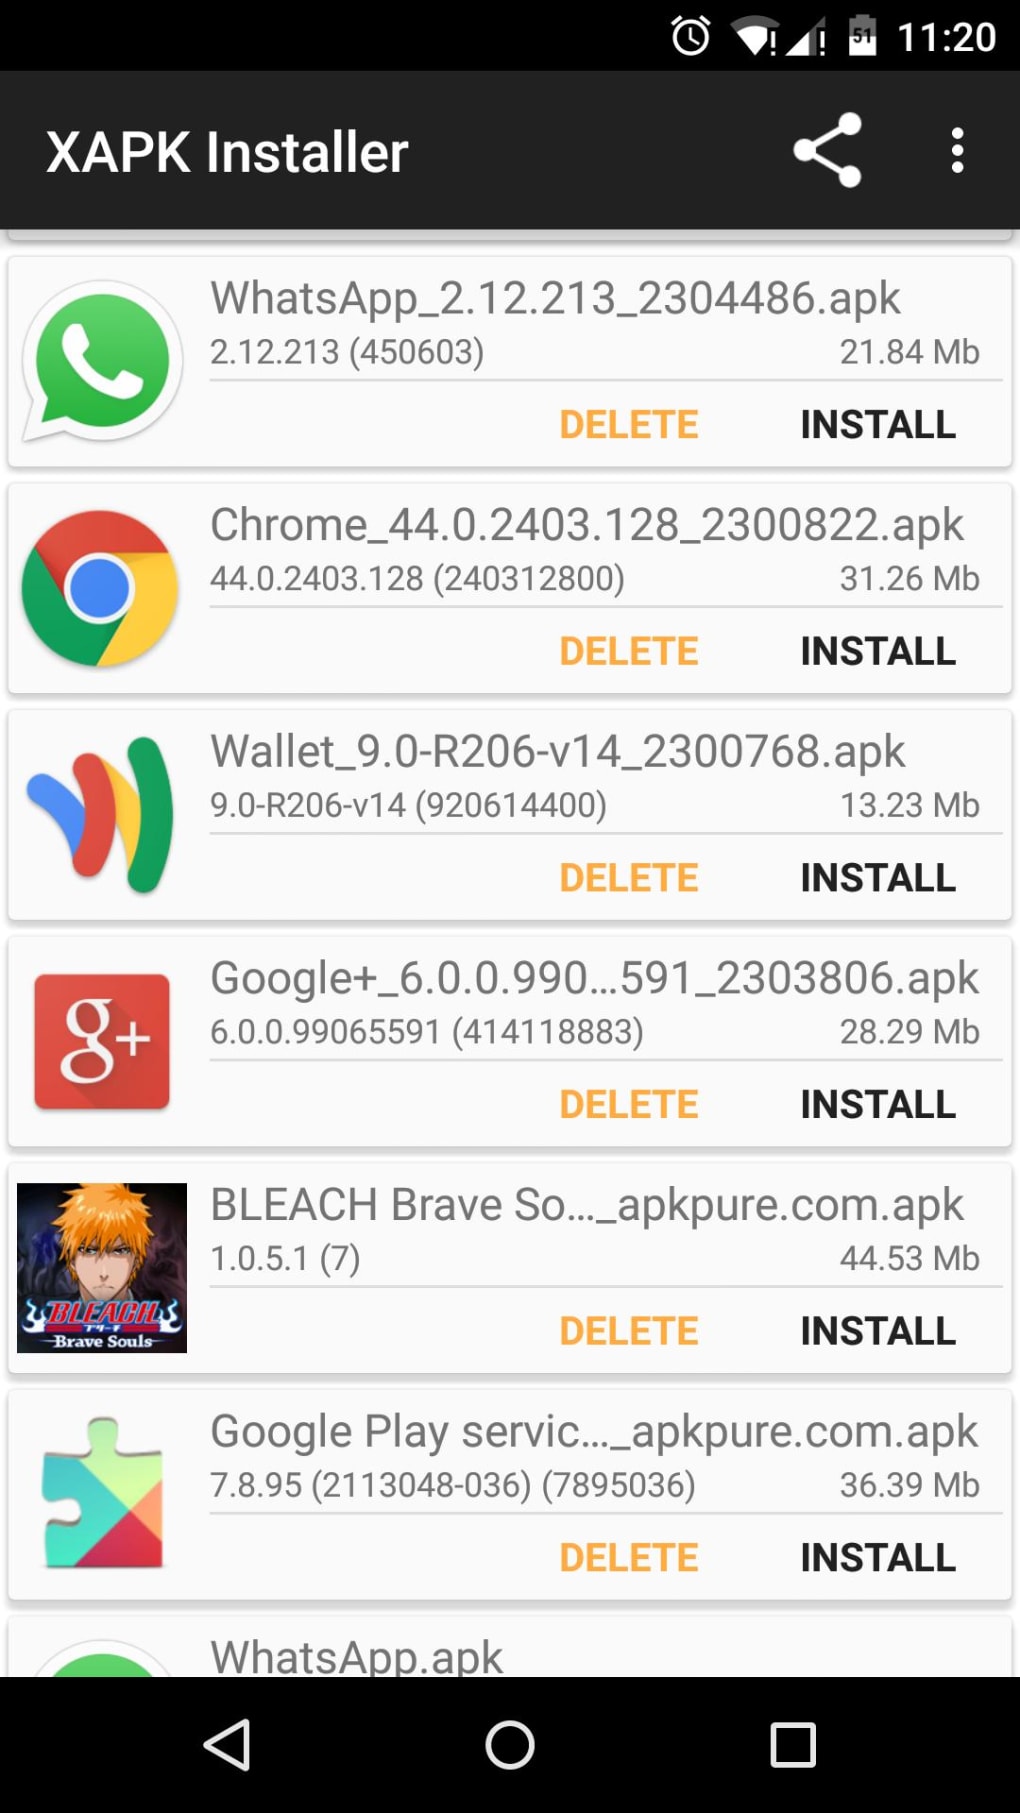 Download XAPK Installer APK 2.2.2 for Android